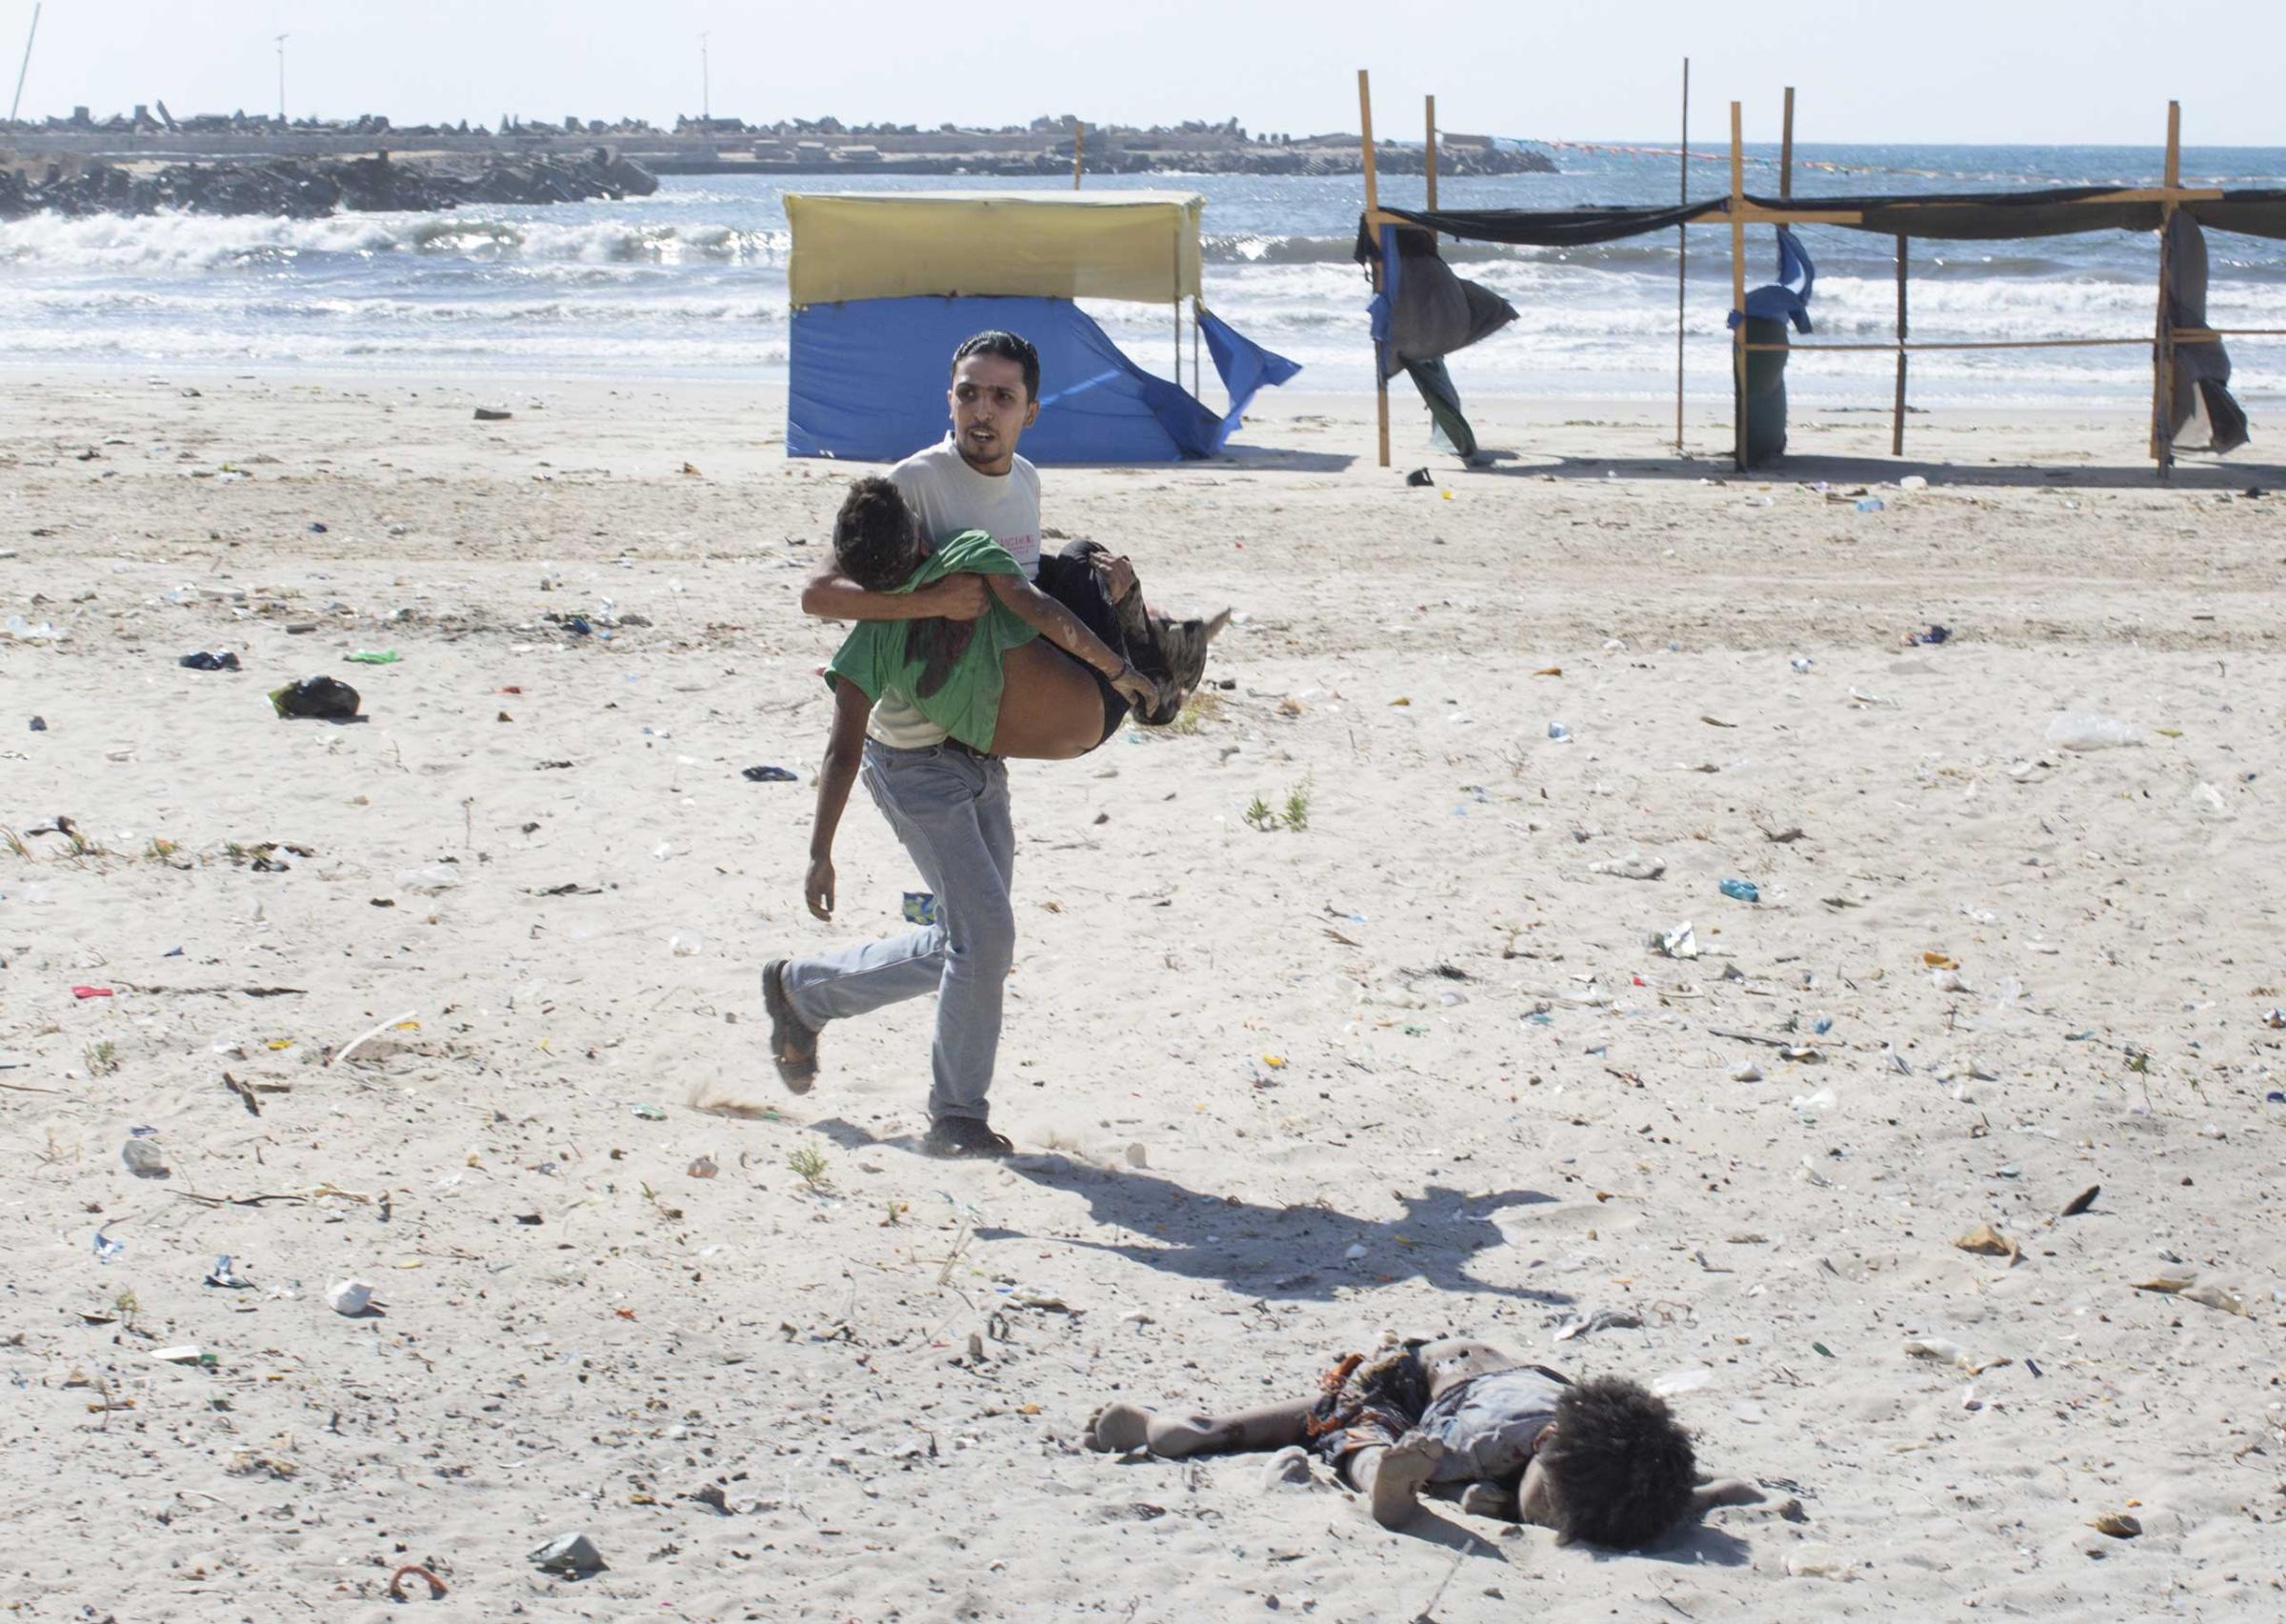 A man carries a child as another lies dead after two explosions on a beach in Gaza, July 16, 2014.